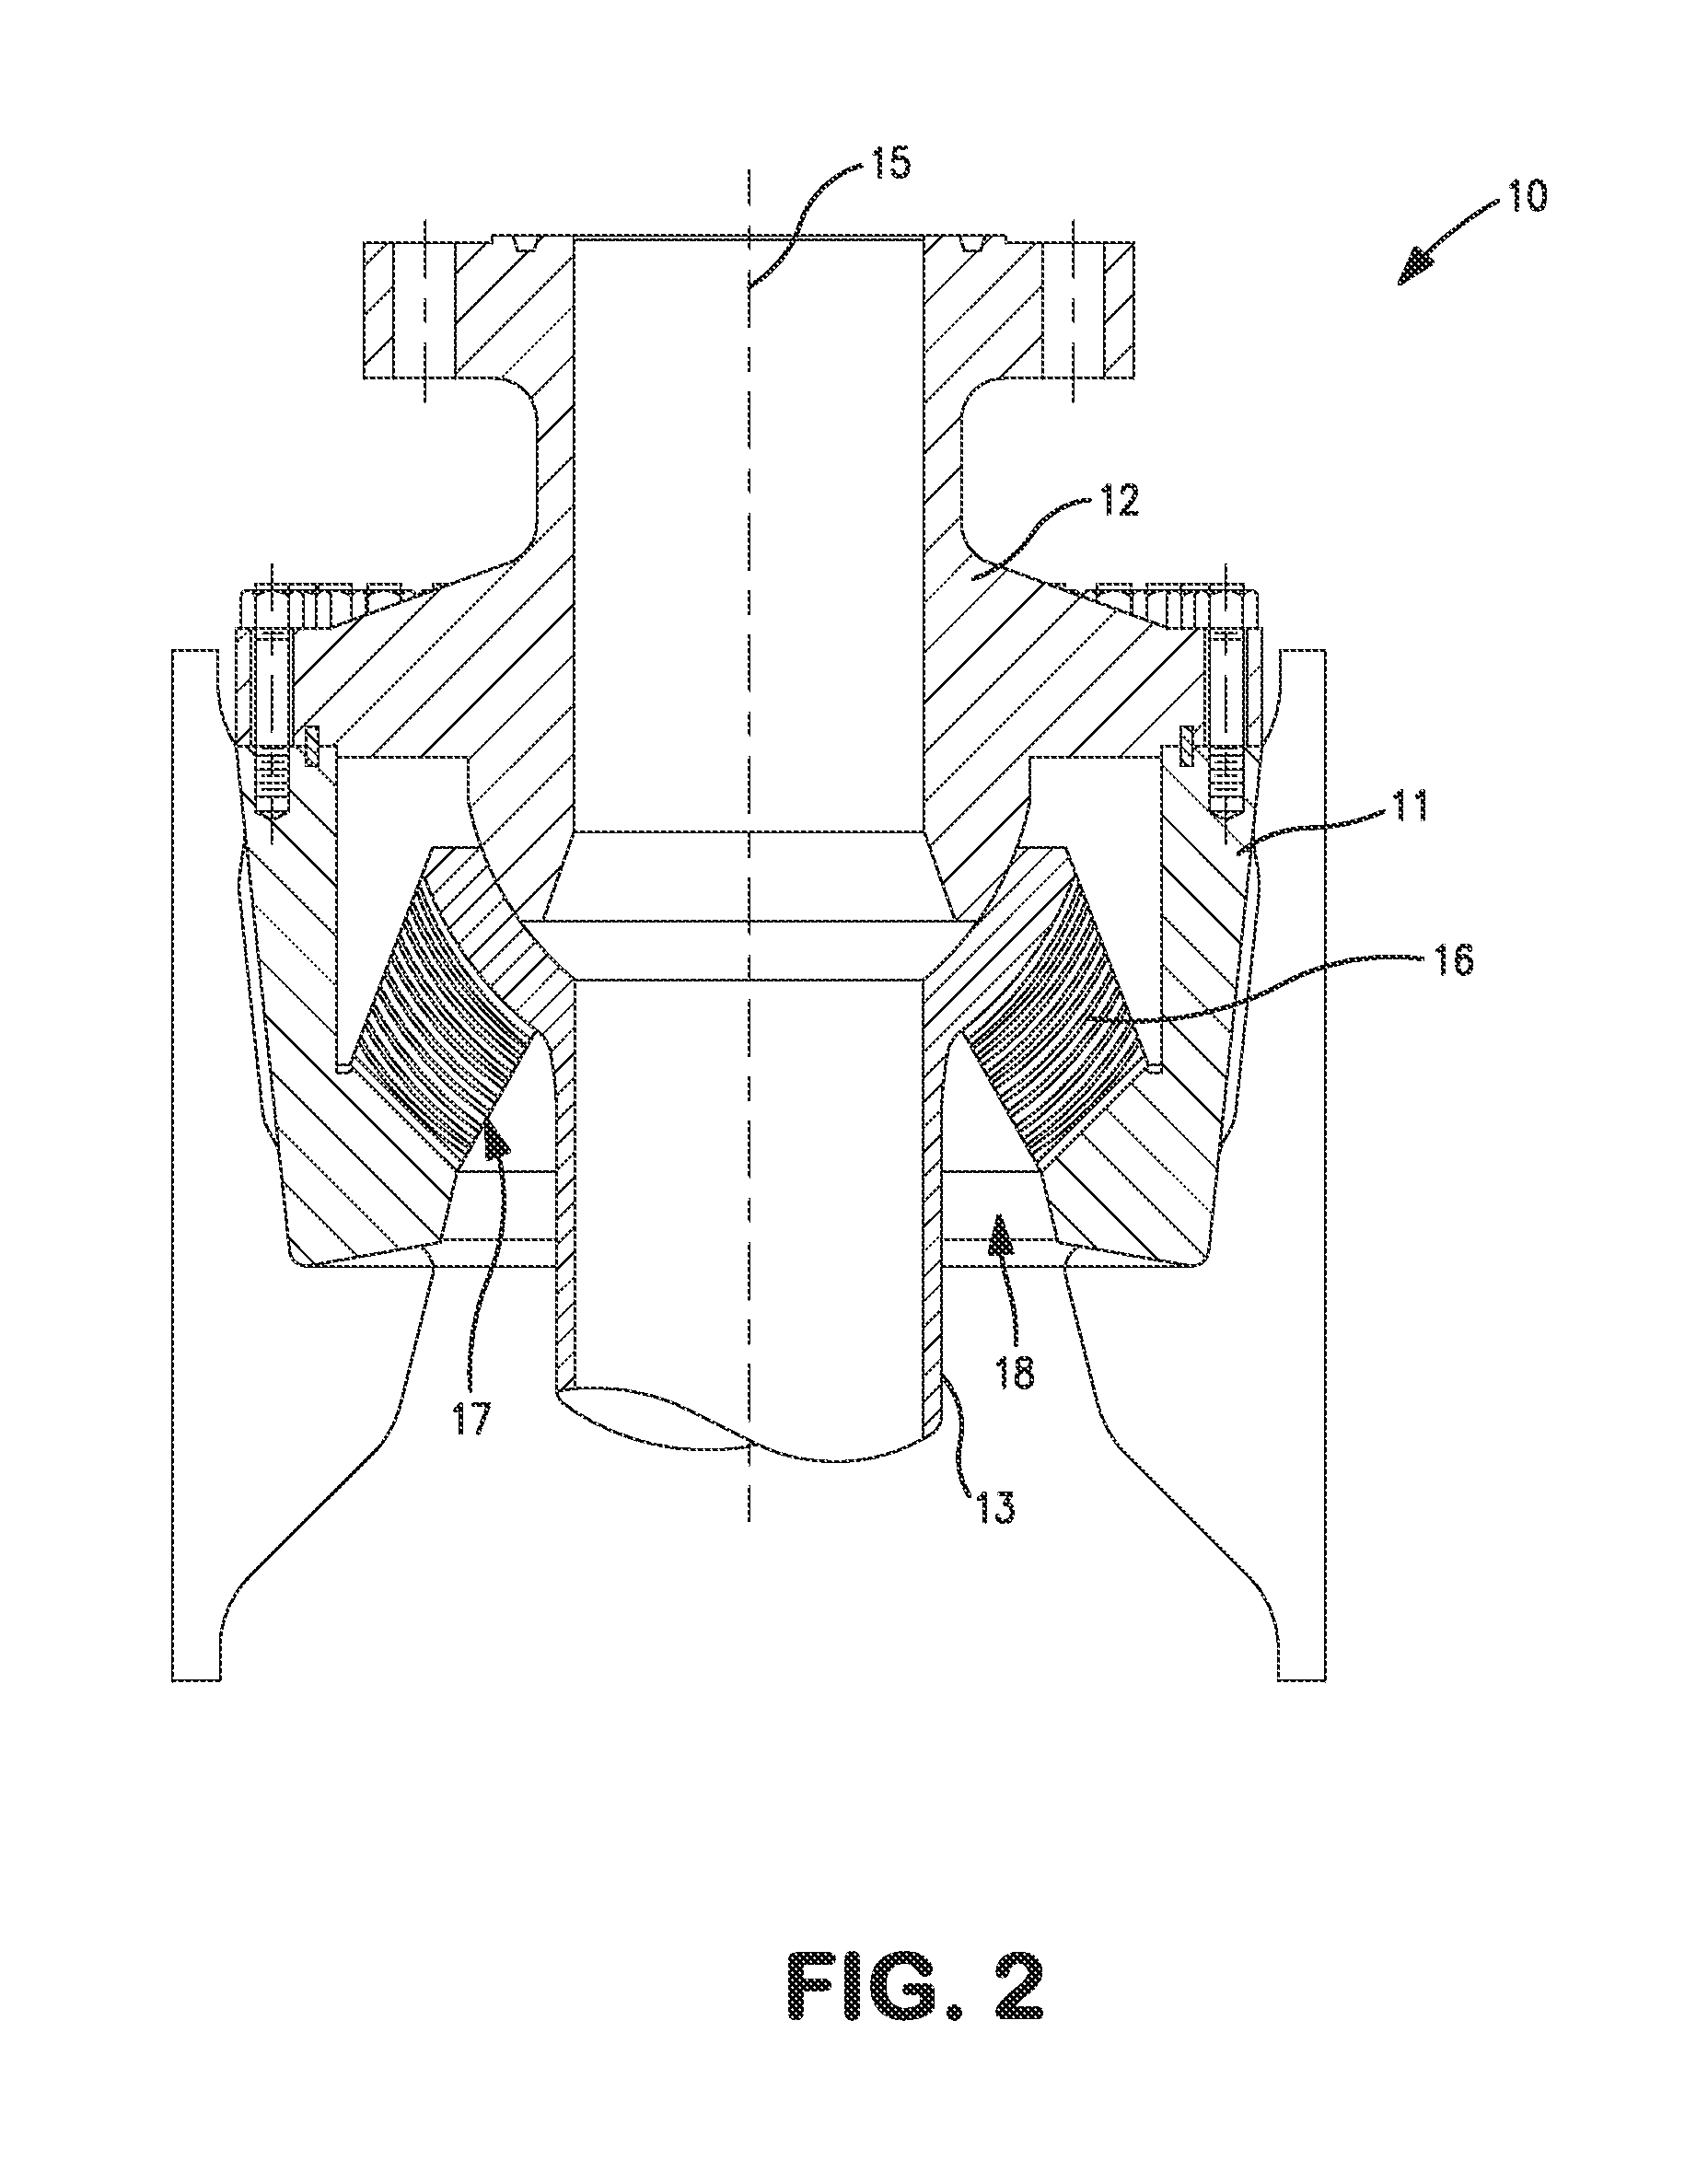 Apparatus and methods for inspecting and cleaning subsea flex joints